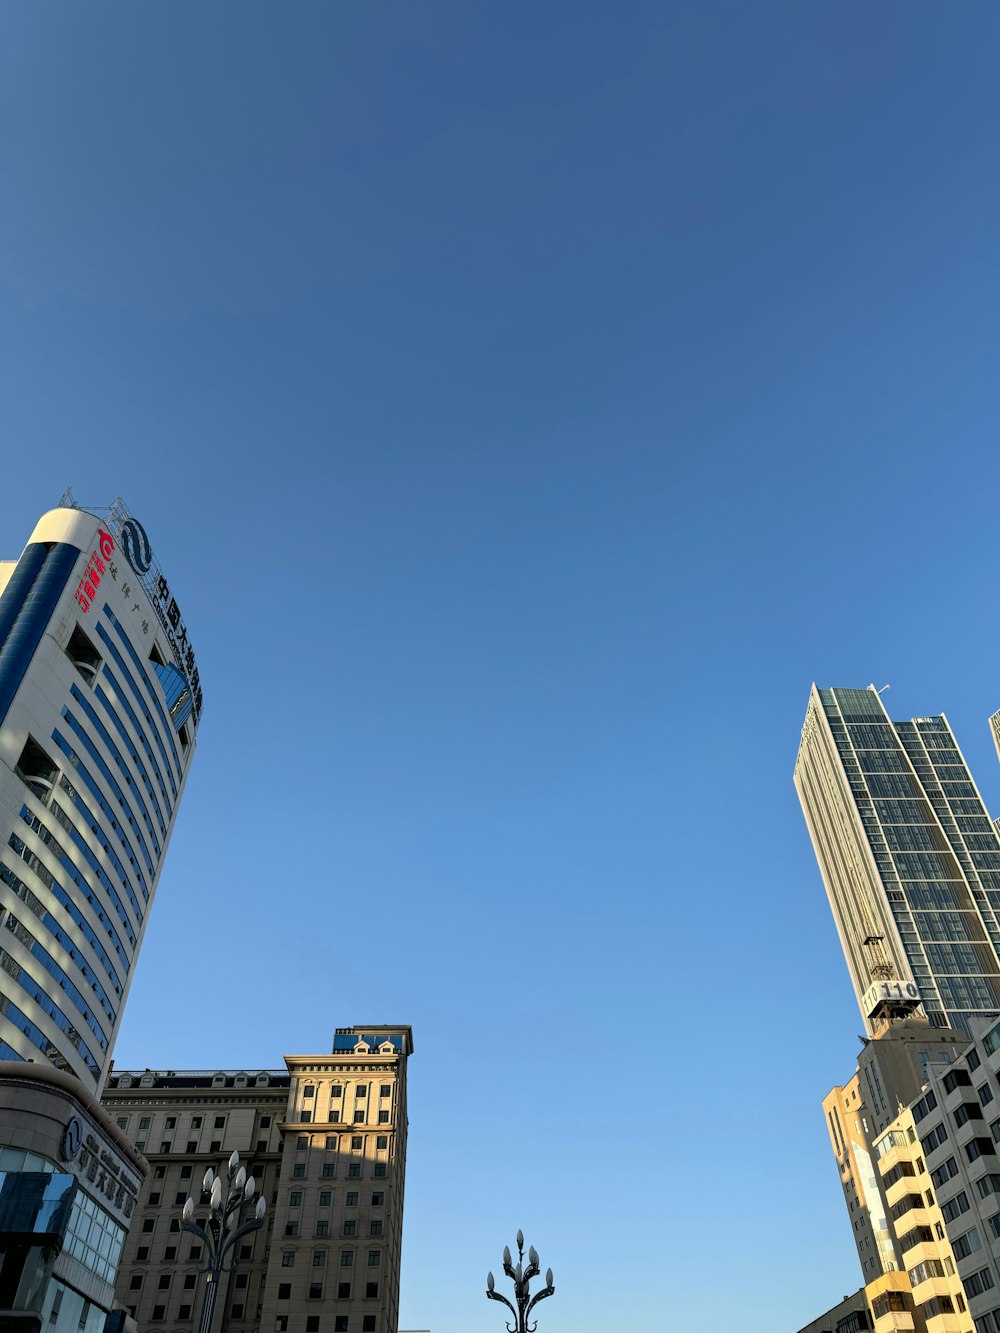 a clear blue sky over a city with tall buildings